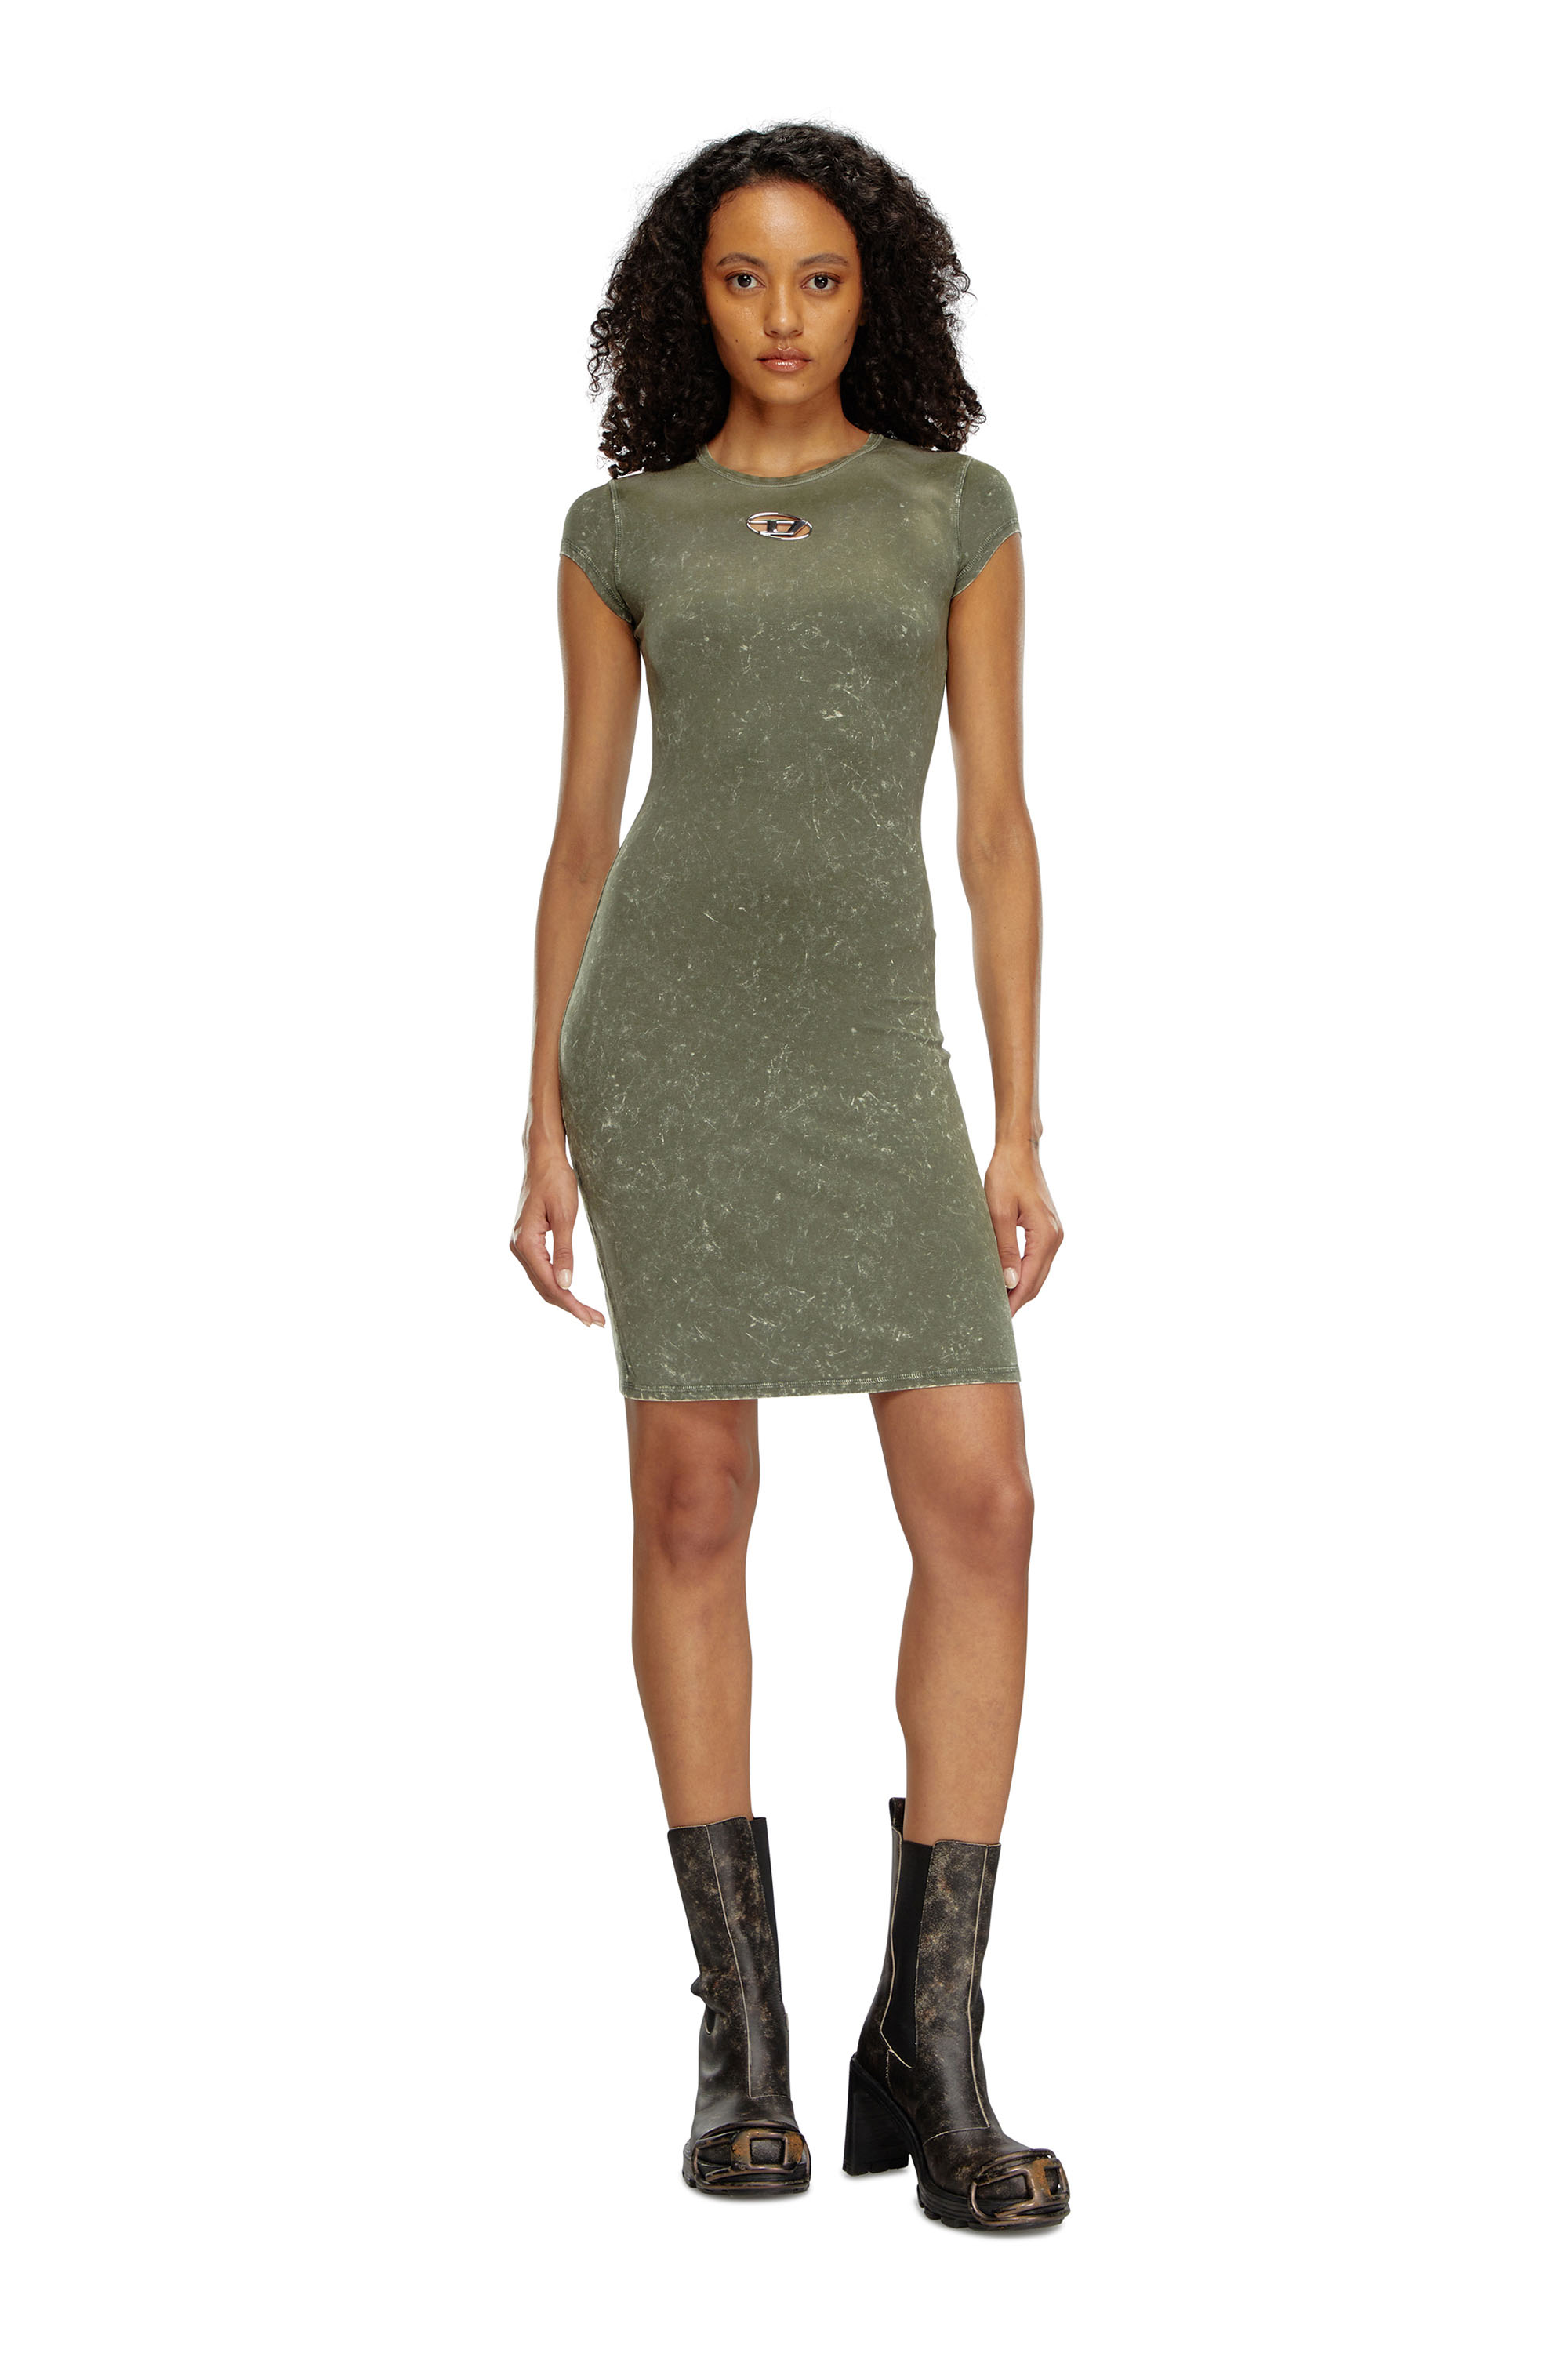 Diesel - D-ANGIEL-P1, Woman Short dress in marbled stretch jersey in Green - Image 1